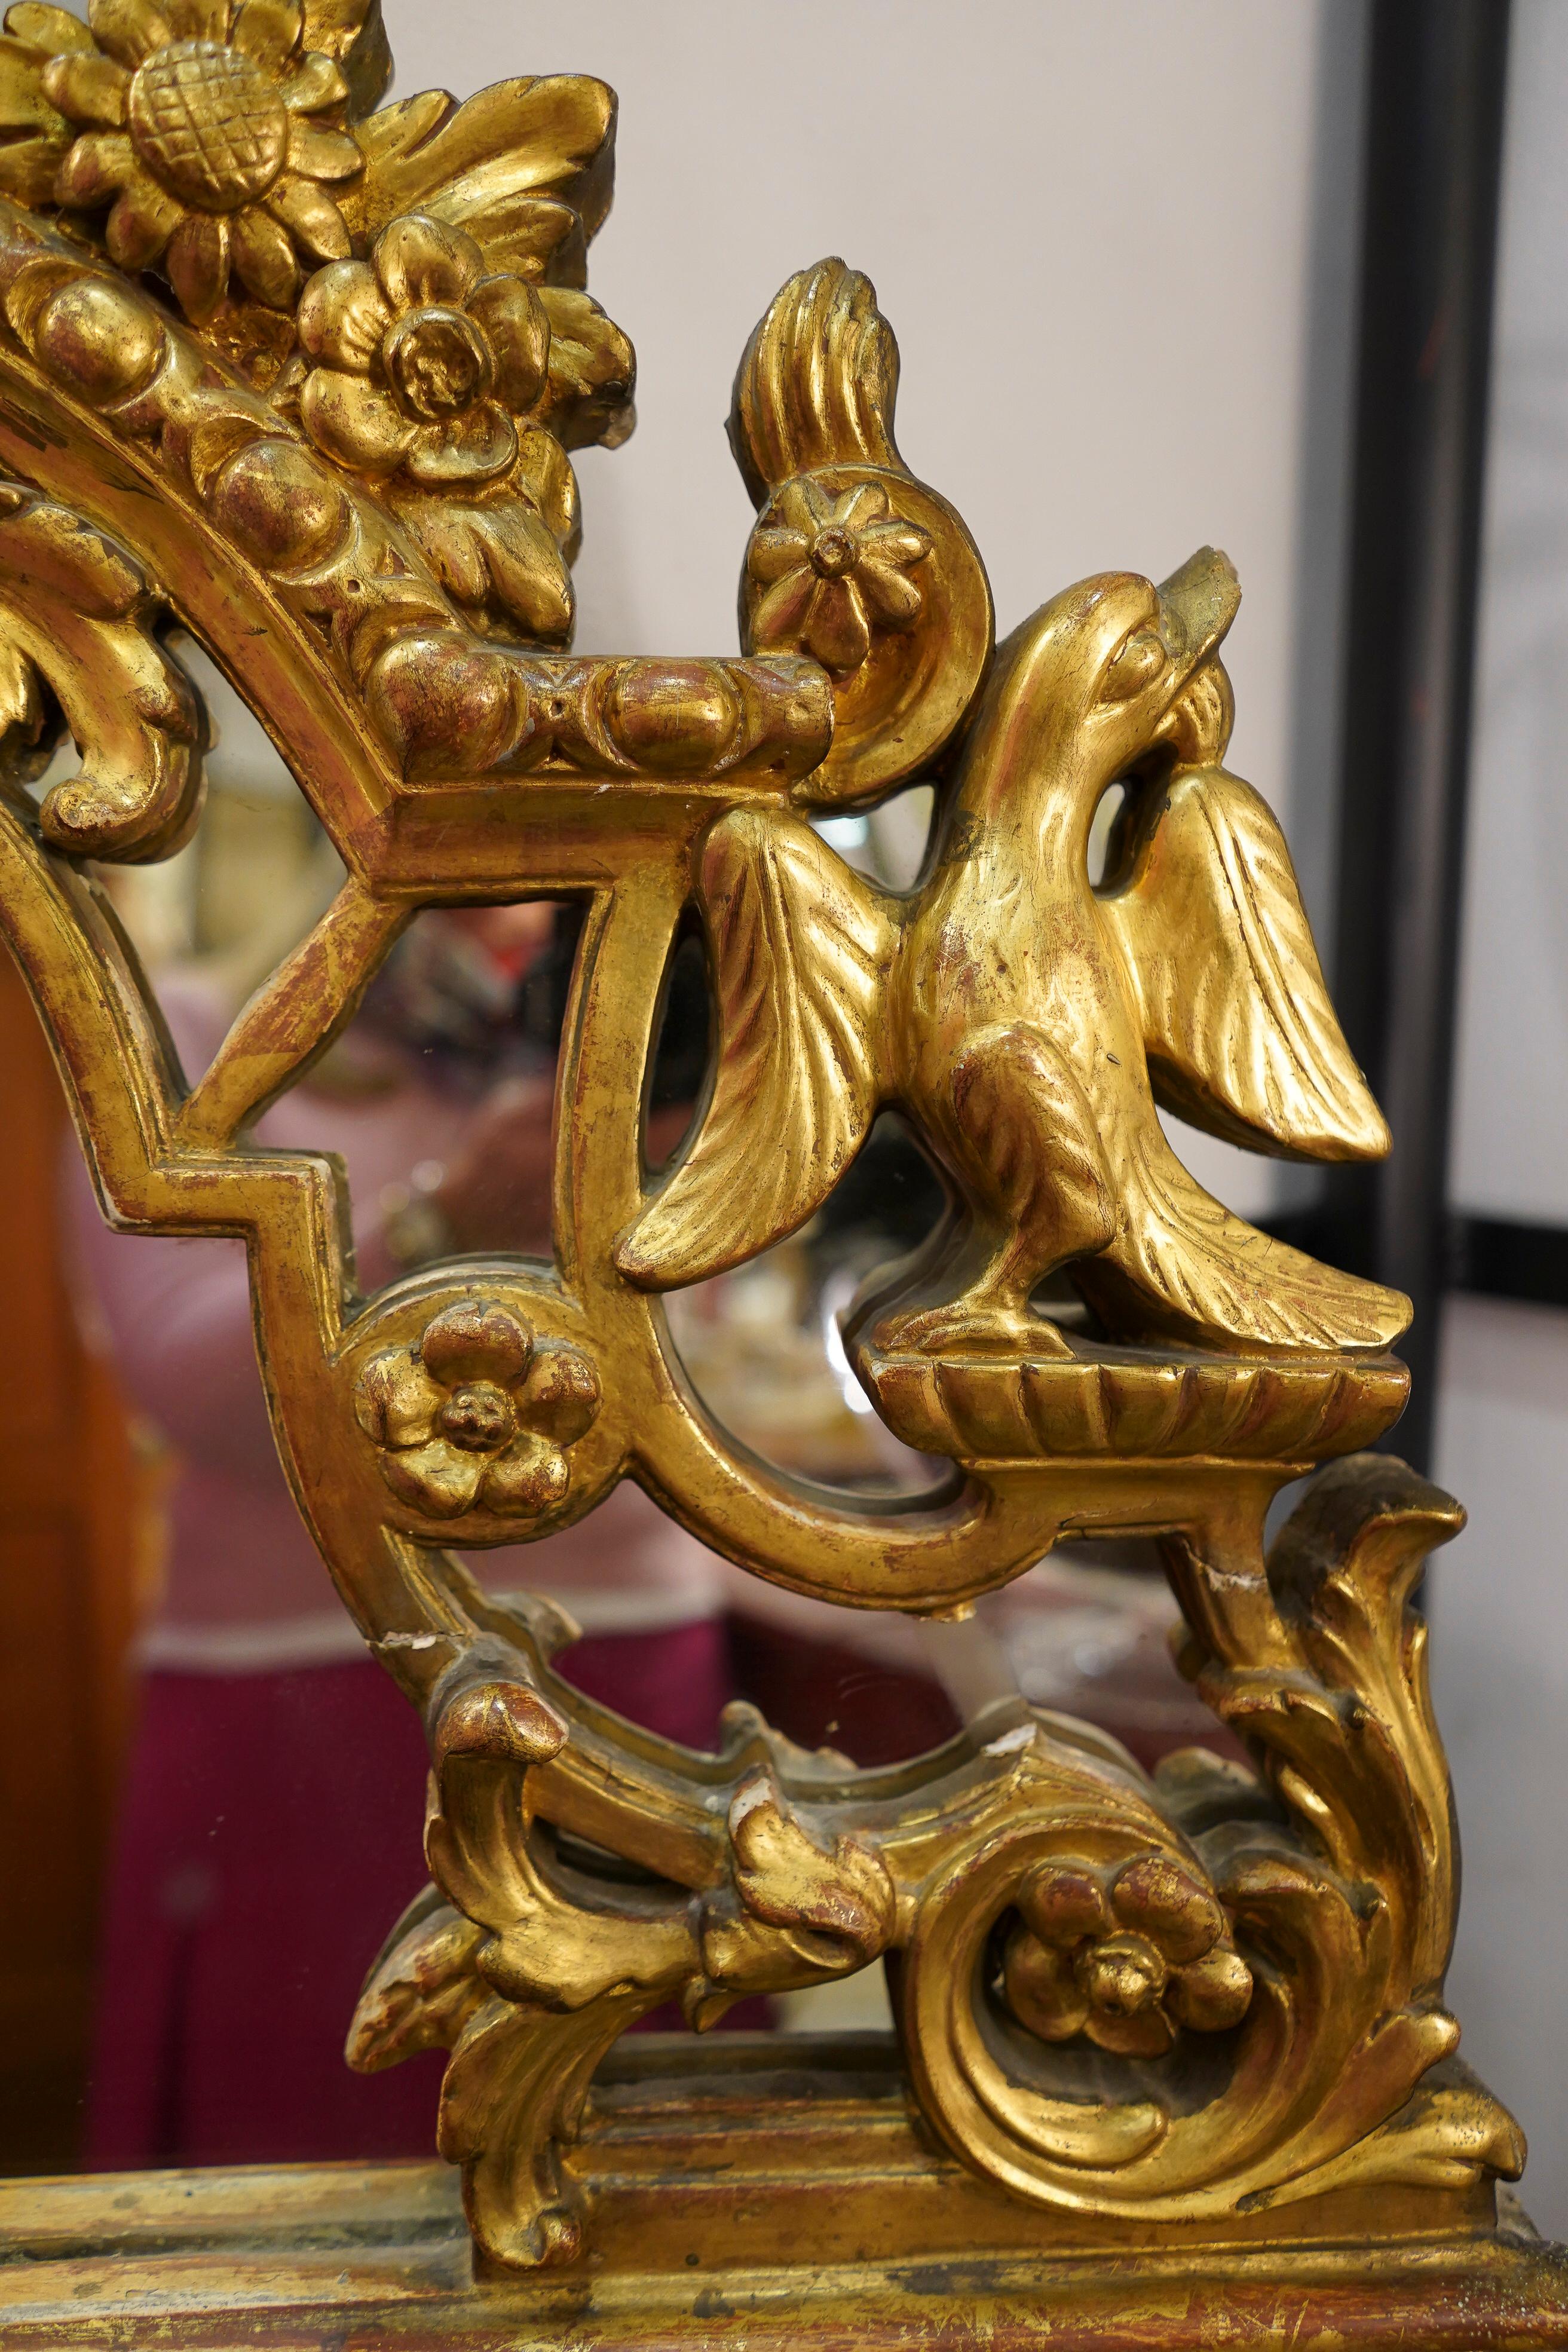 18th Century French Carved and Gilded Wood with Crest of the Sun King 12